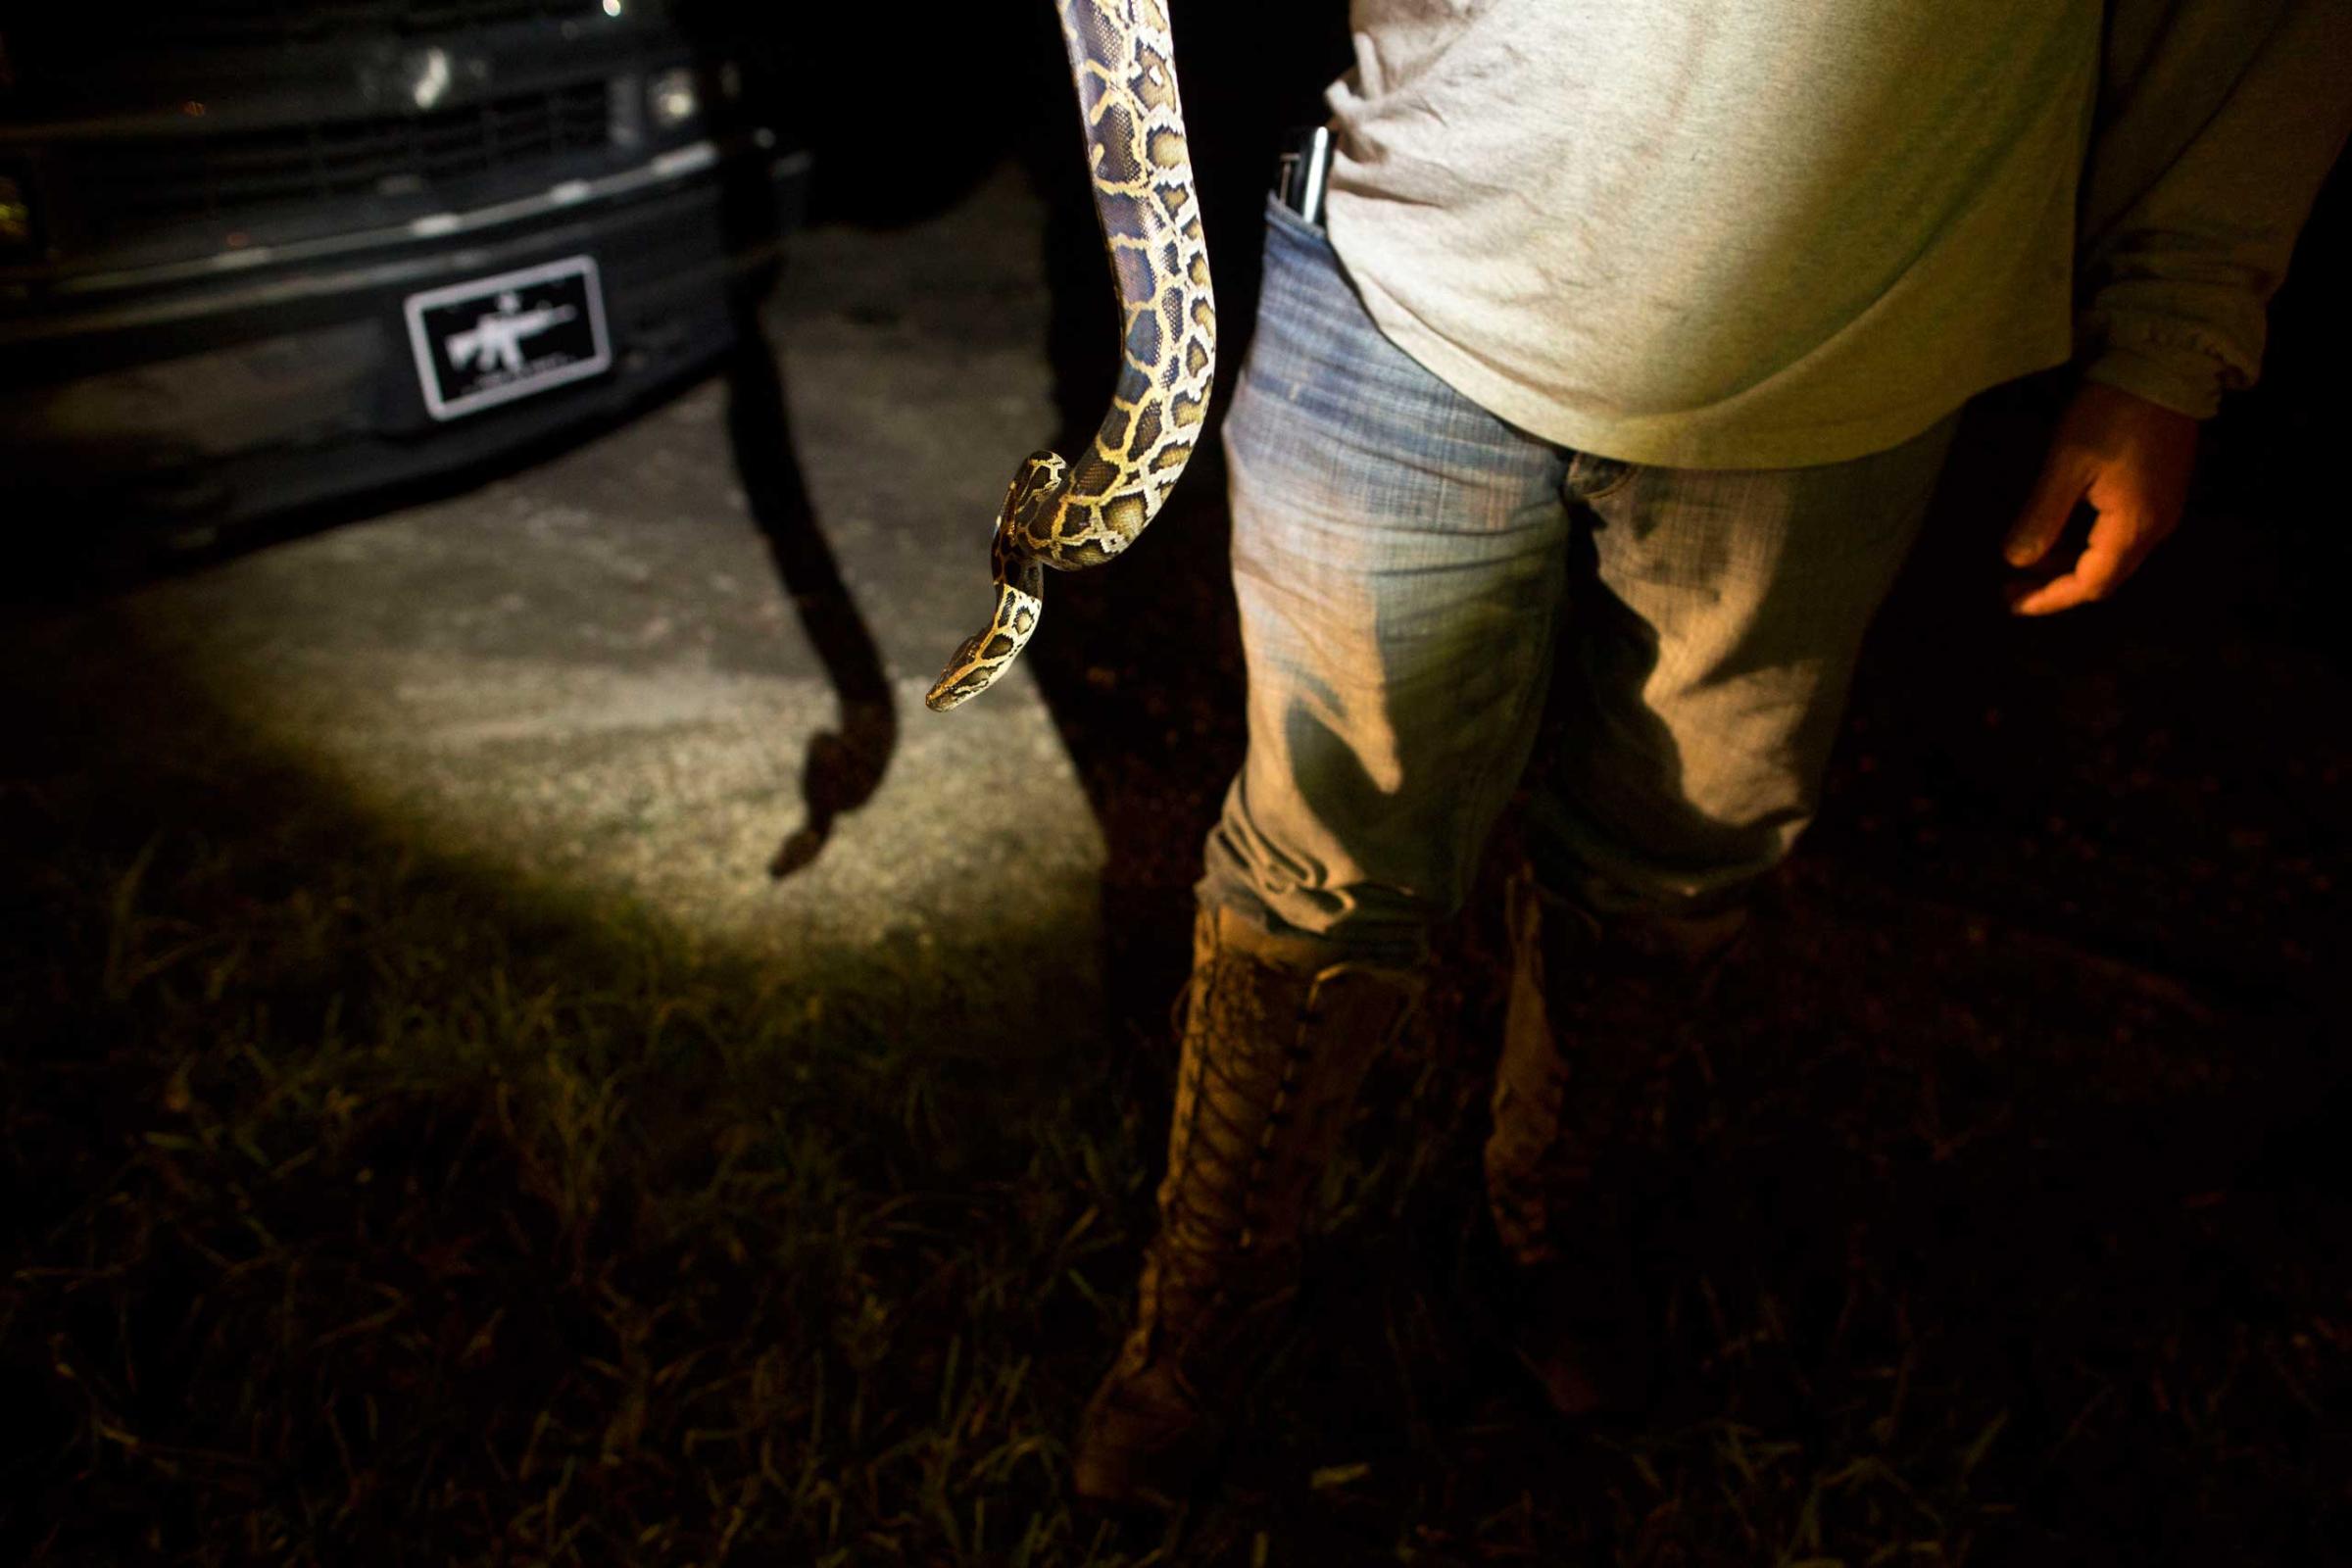 Veteran and volunteer member of the "Swamp Apes" Barry Offenburger holds a captured python as he and fellow members deliver it to a ranger station at Florida's Everglades National Park early morning Sunday Oct. 5, 2014. (David Guttenfelder for TIME)